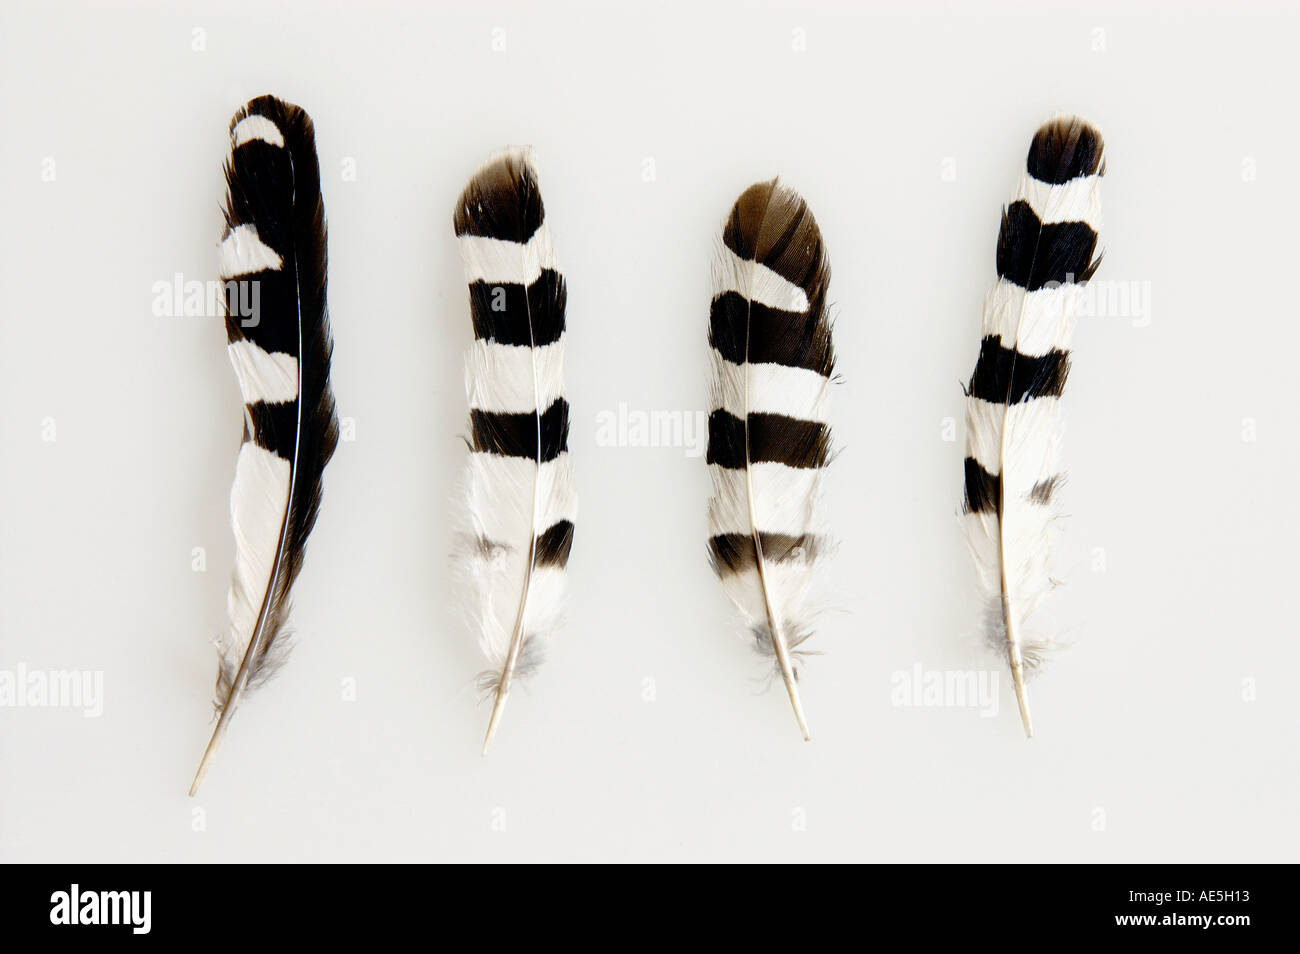 Hoopoe (Upupa epops). Feathers. Studio picture against a white background Stock Photo